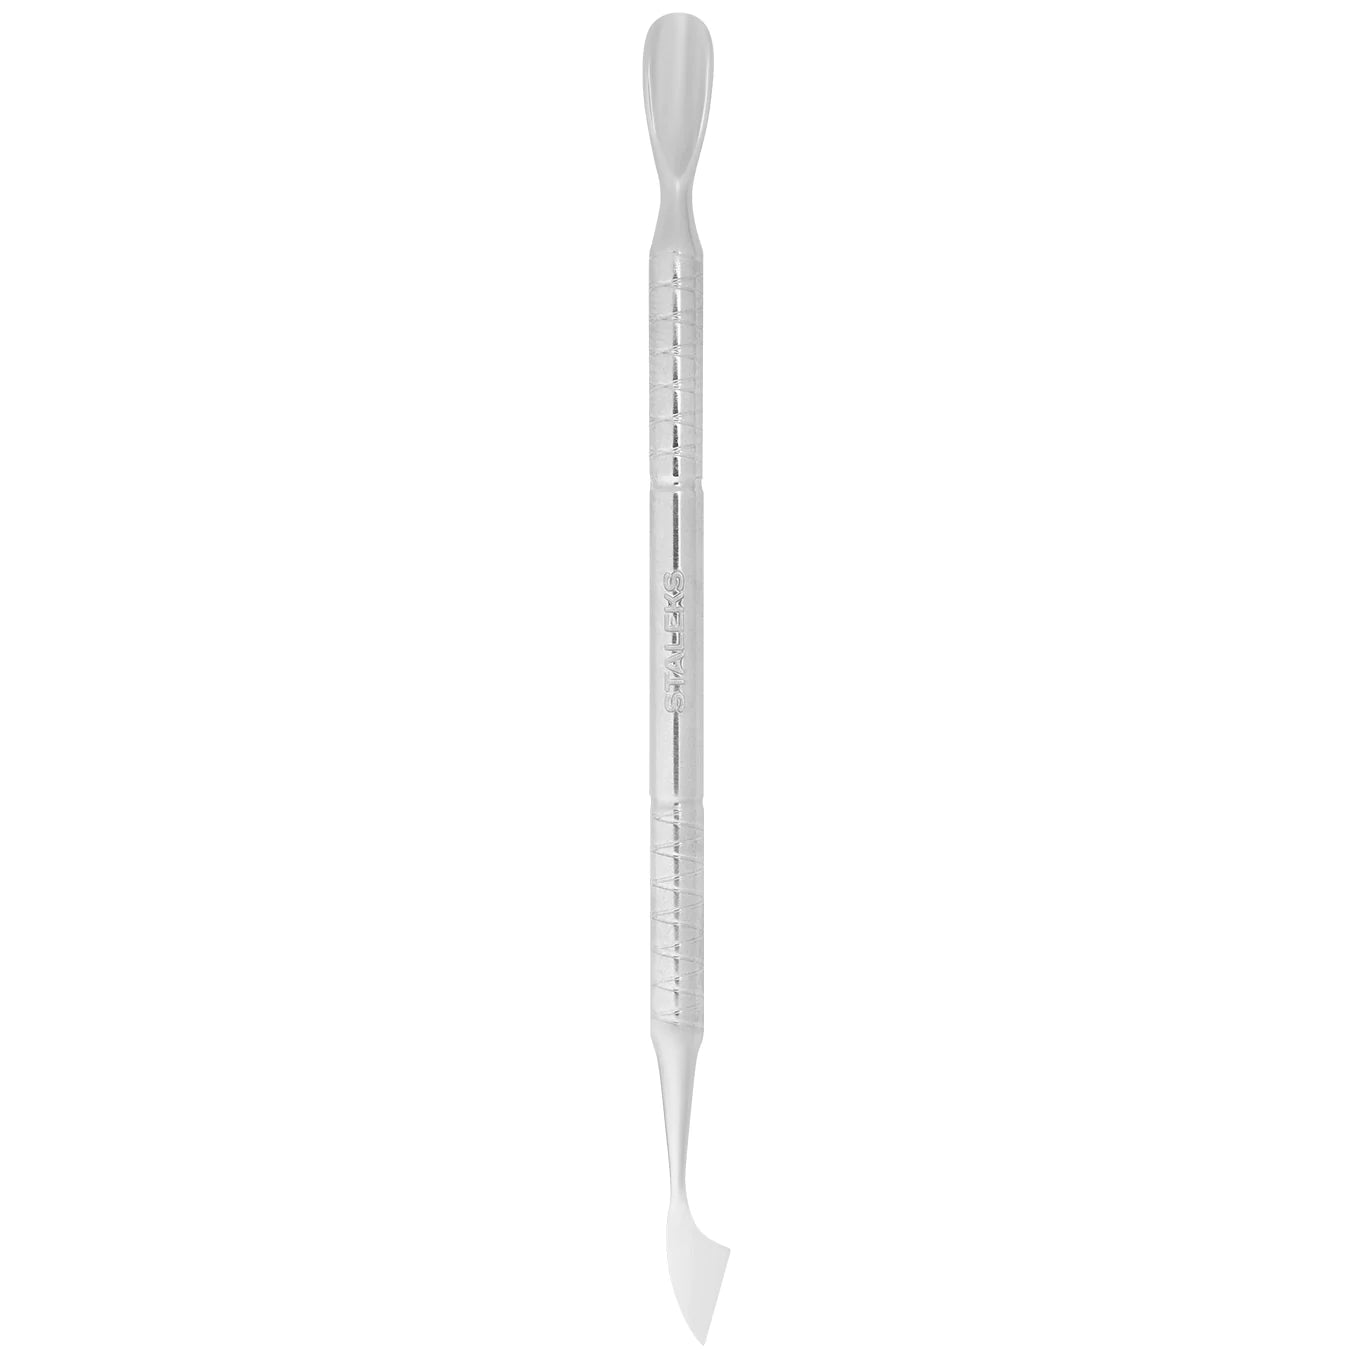 Cuticle pusher CLASSIC 30 TYPE 2 (rounded pusher and remover) -PC-30-2